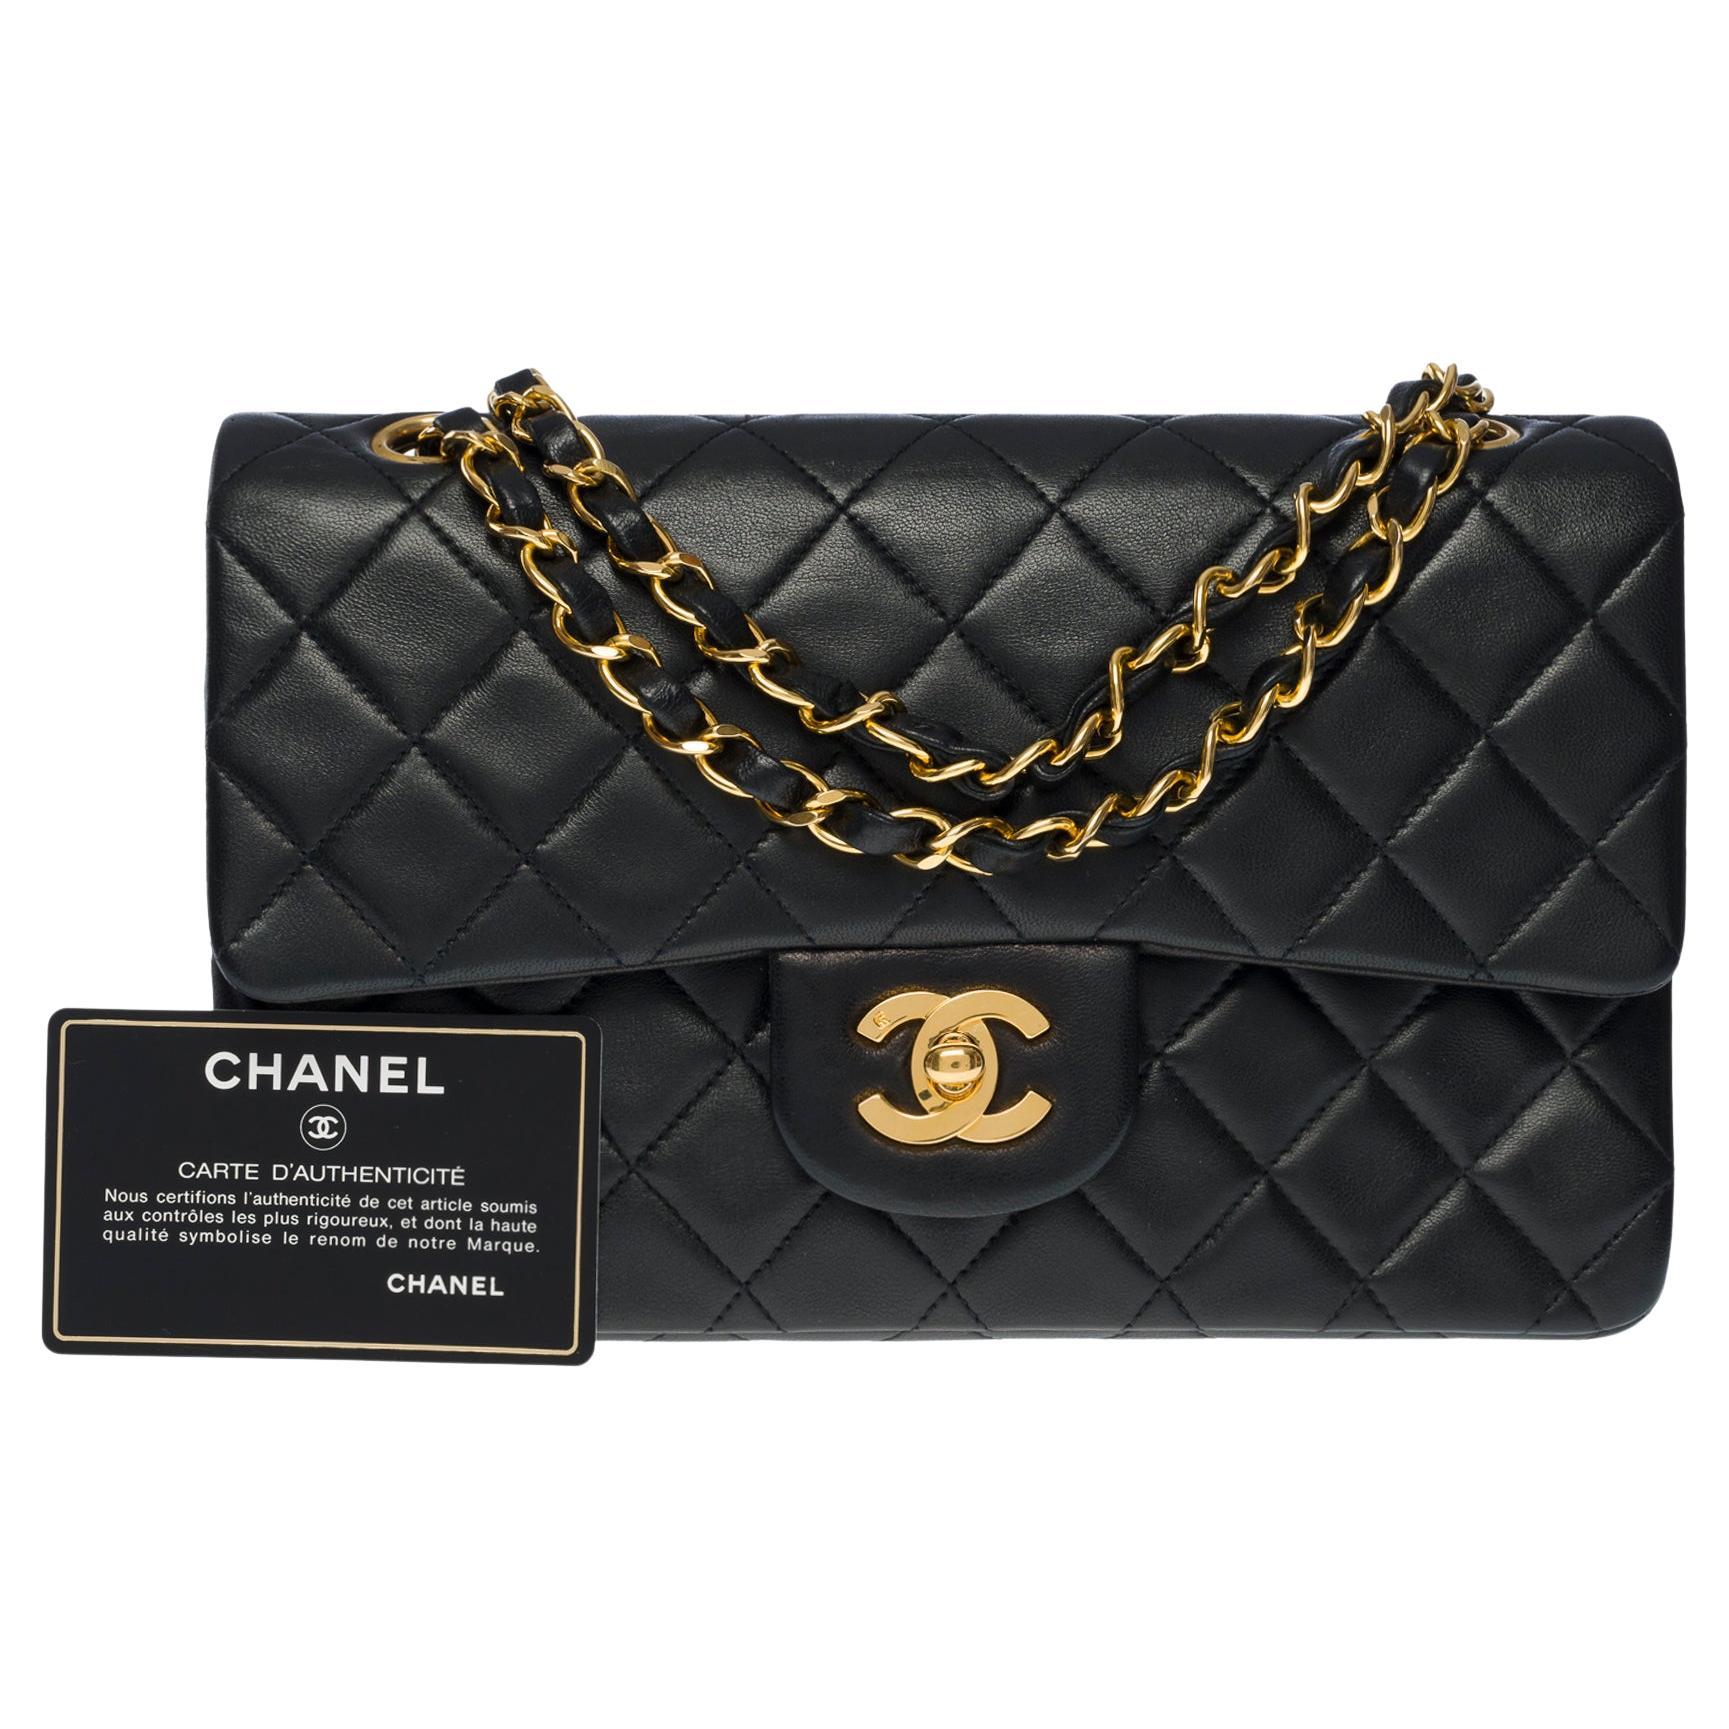 NEW VINTAGE CHANEL HANDBAG SMALL CLASSIC TIMELESS QUILTED LEATHER